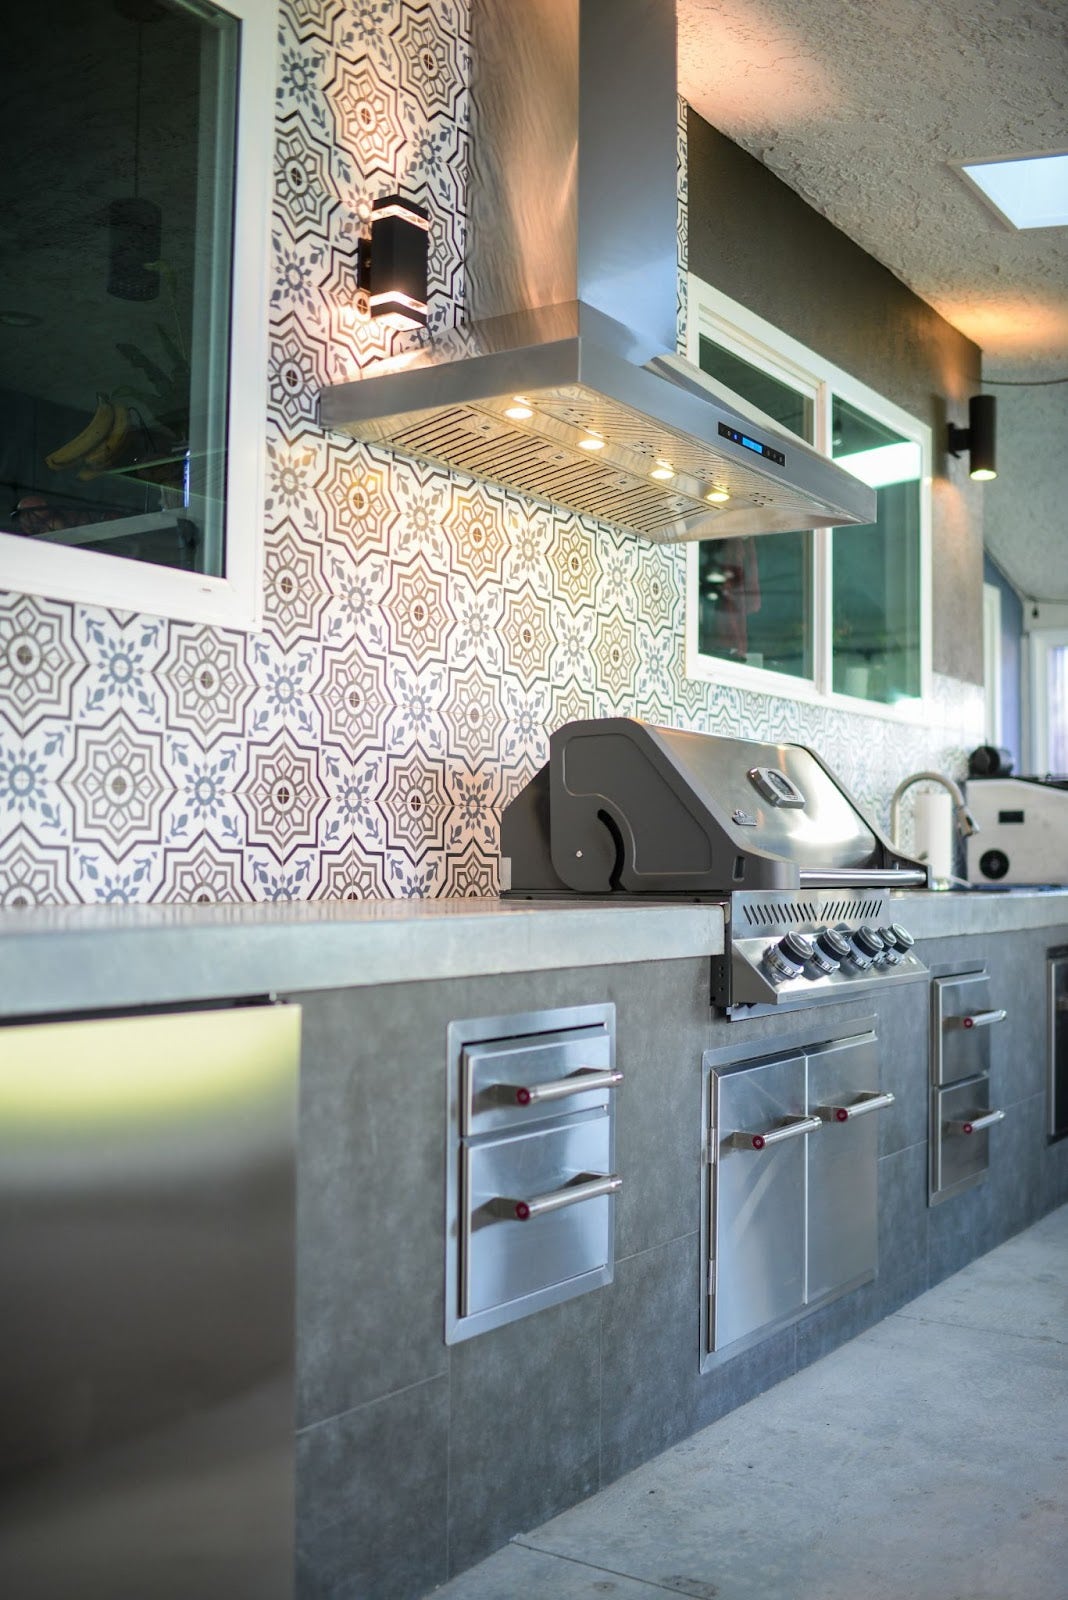 Chic Outdoor Kitchen: Bold patterned tiles and a Proline hood create a modern vibe in this outdoor kitchen. Stainless steel hood offers ventilation for smoke-free grilling. Perfect for entertaining with modern appliances and ambient lighting.  - Proline Range Hoods - prolinerangehoods.com  